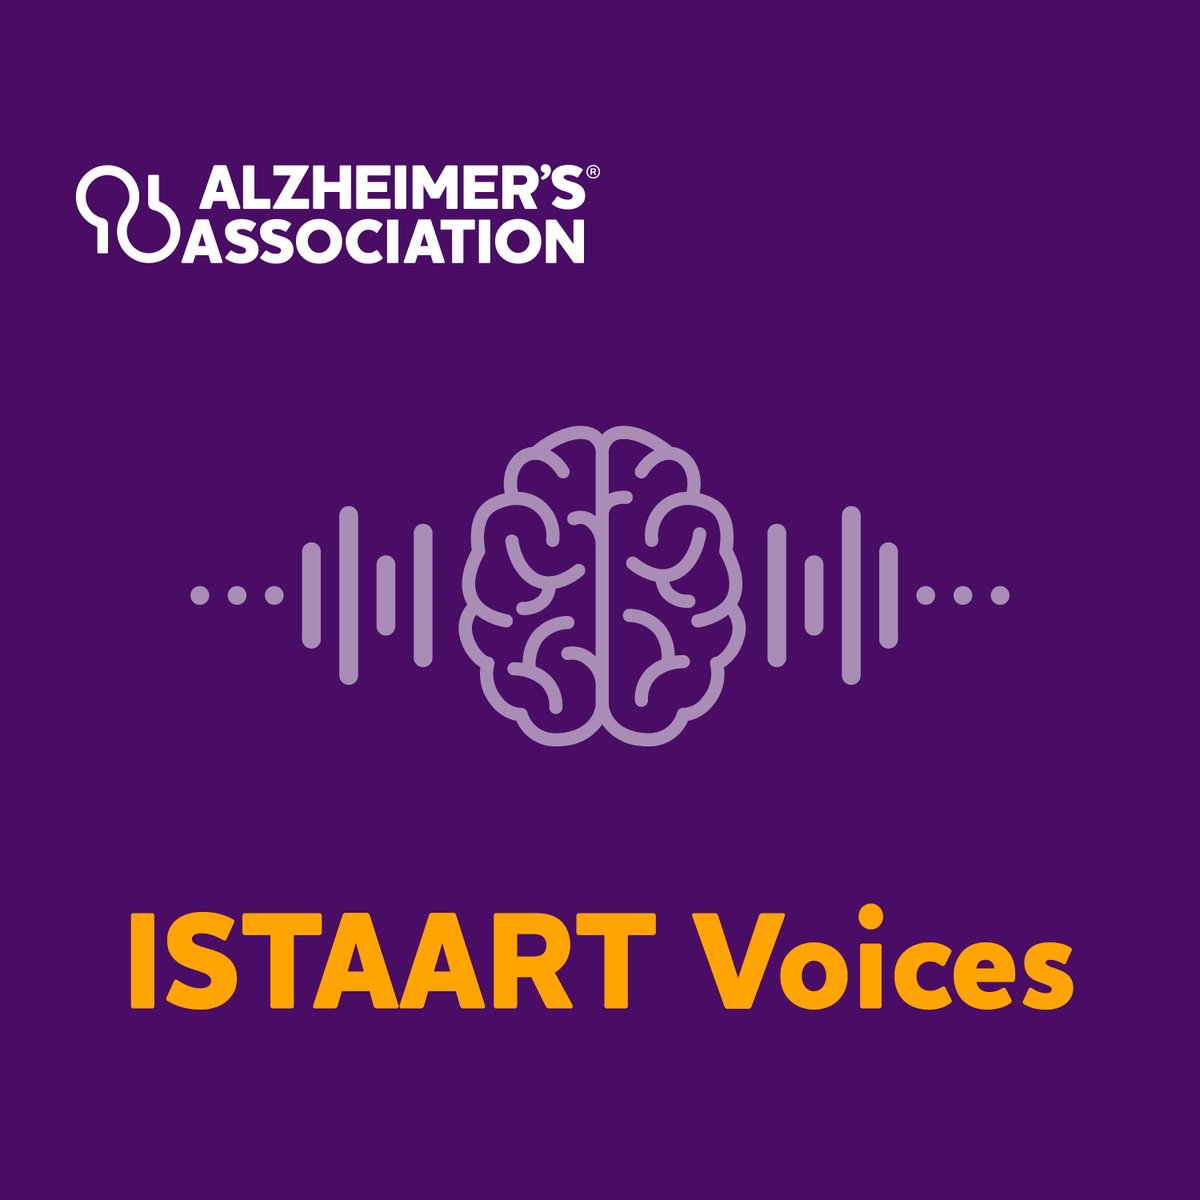 Introducing @ISTAART Voices 🎙️, a new podcast for dementia scientists to stay up to date with the latest research. Hear from leaders who are shaping the field, and dig into recent scientific findings with this new series: alz.org/ISTAARTpodcast.